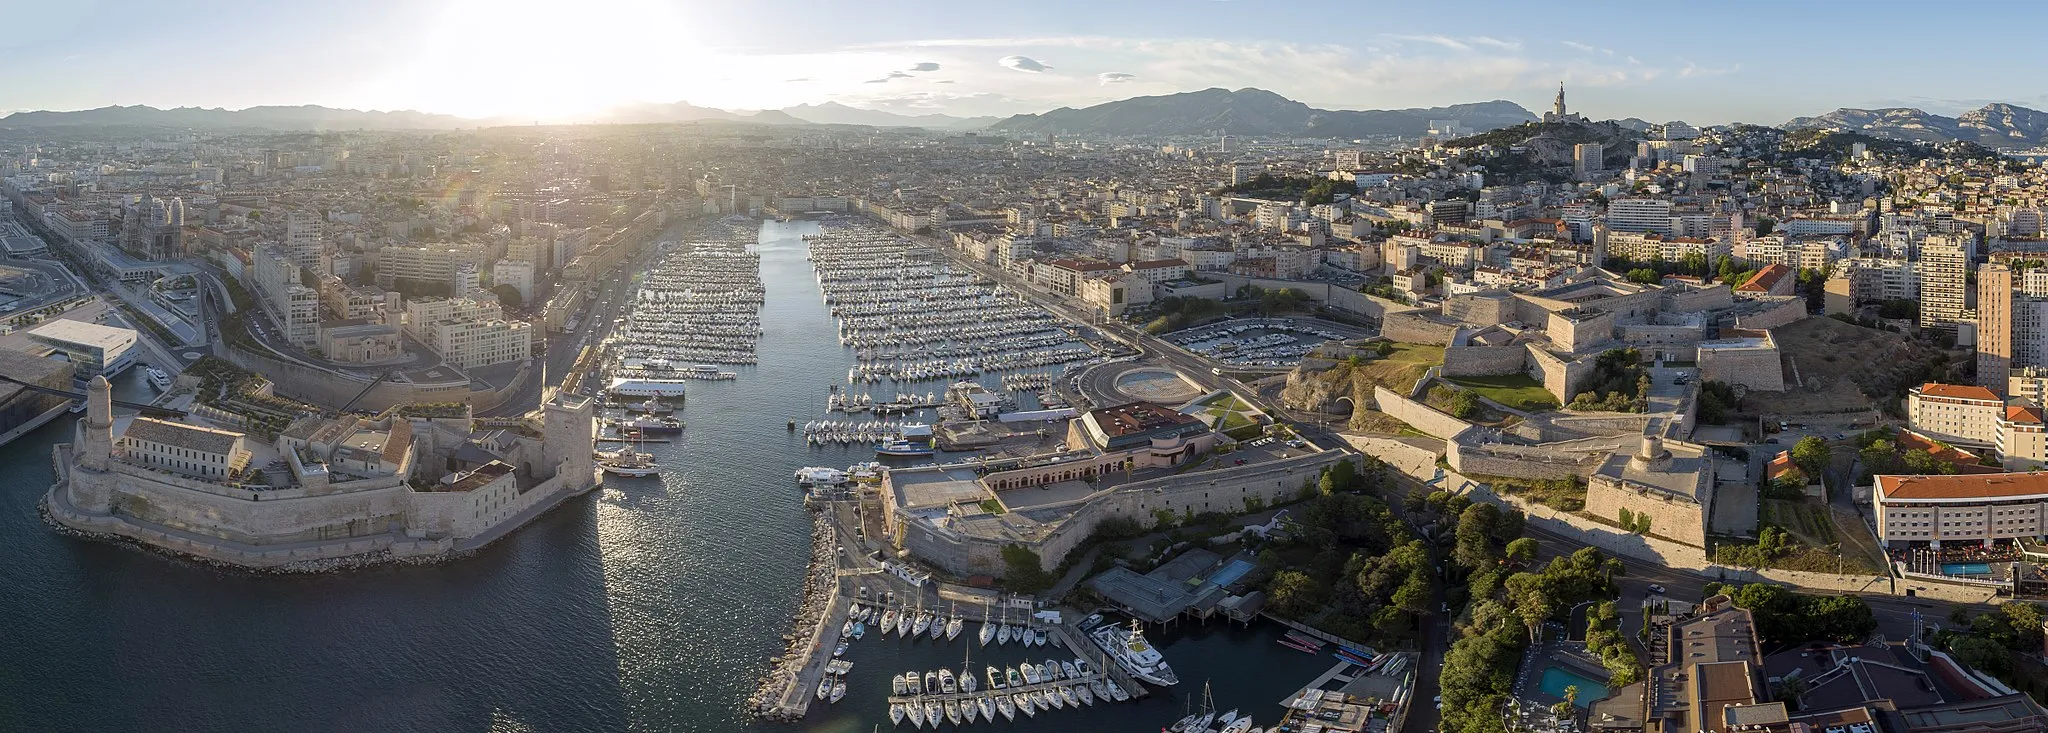 Photo showing: panorama of vieux port marseille